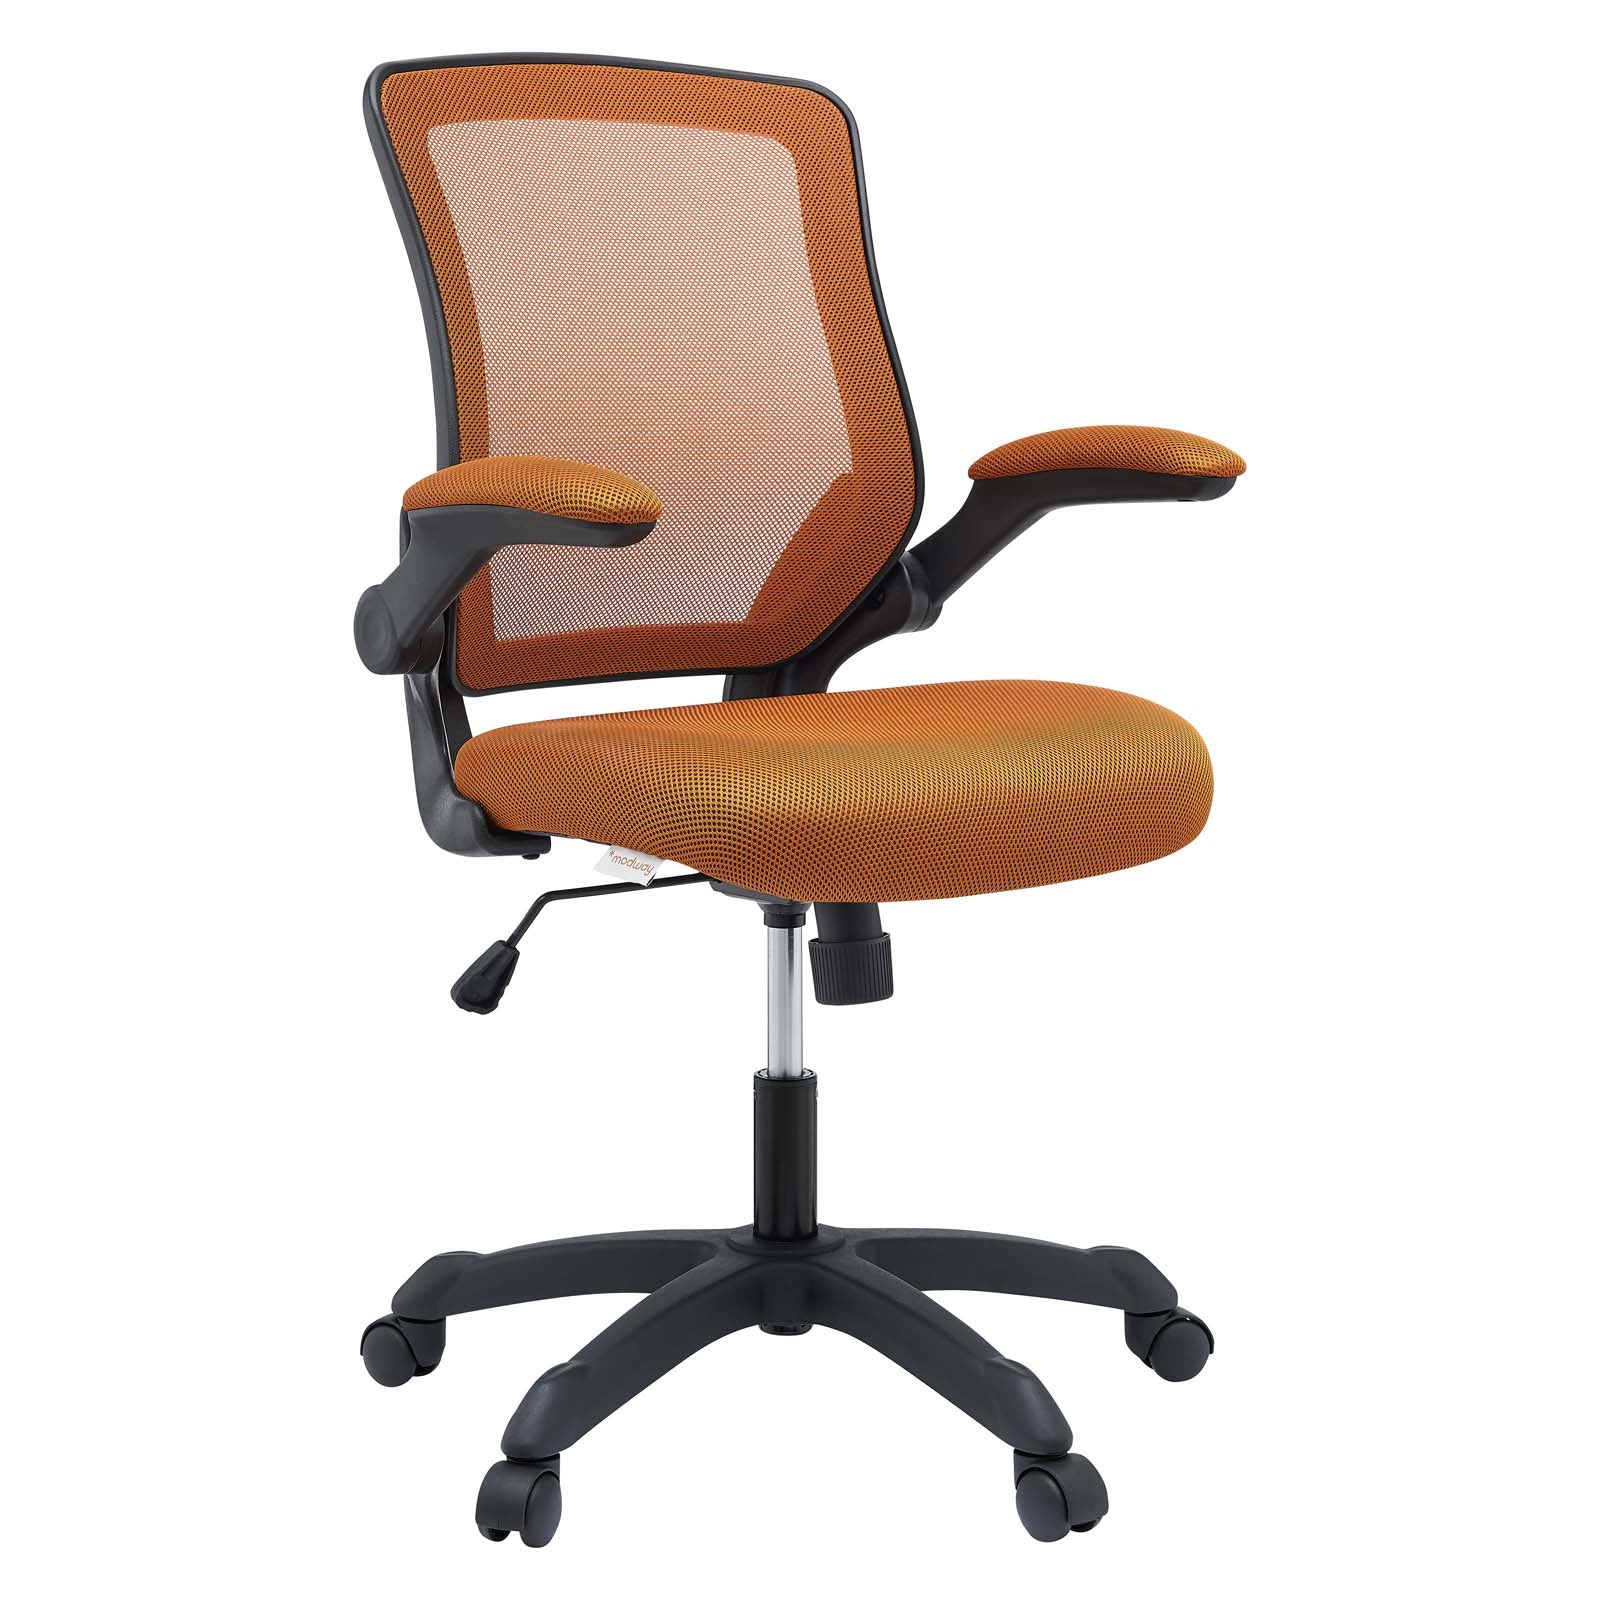 Modway Task Chairs - Veer Mesh Office Chair Tan